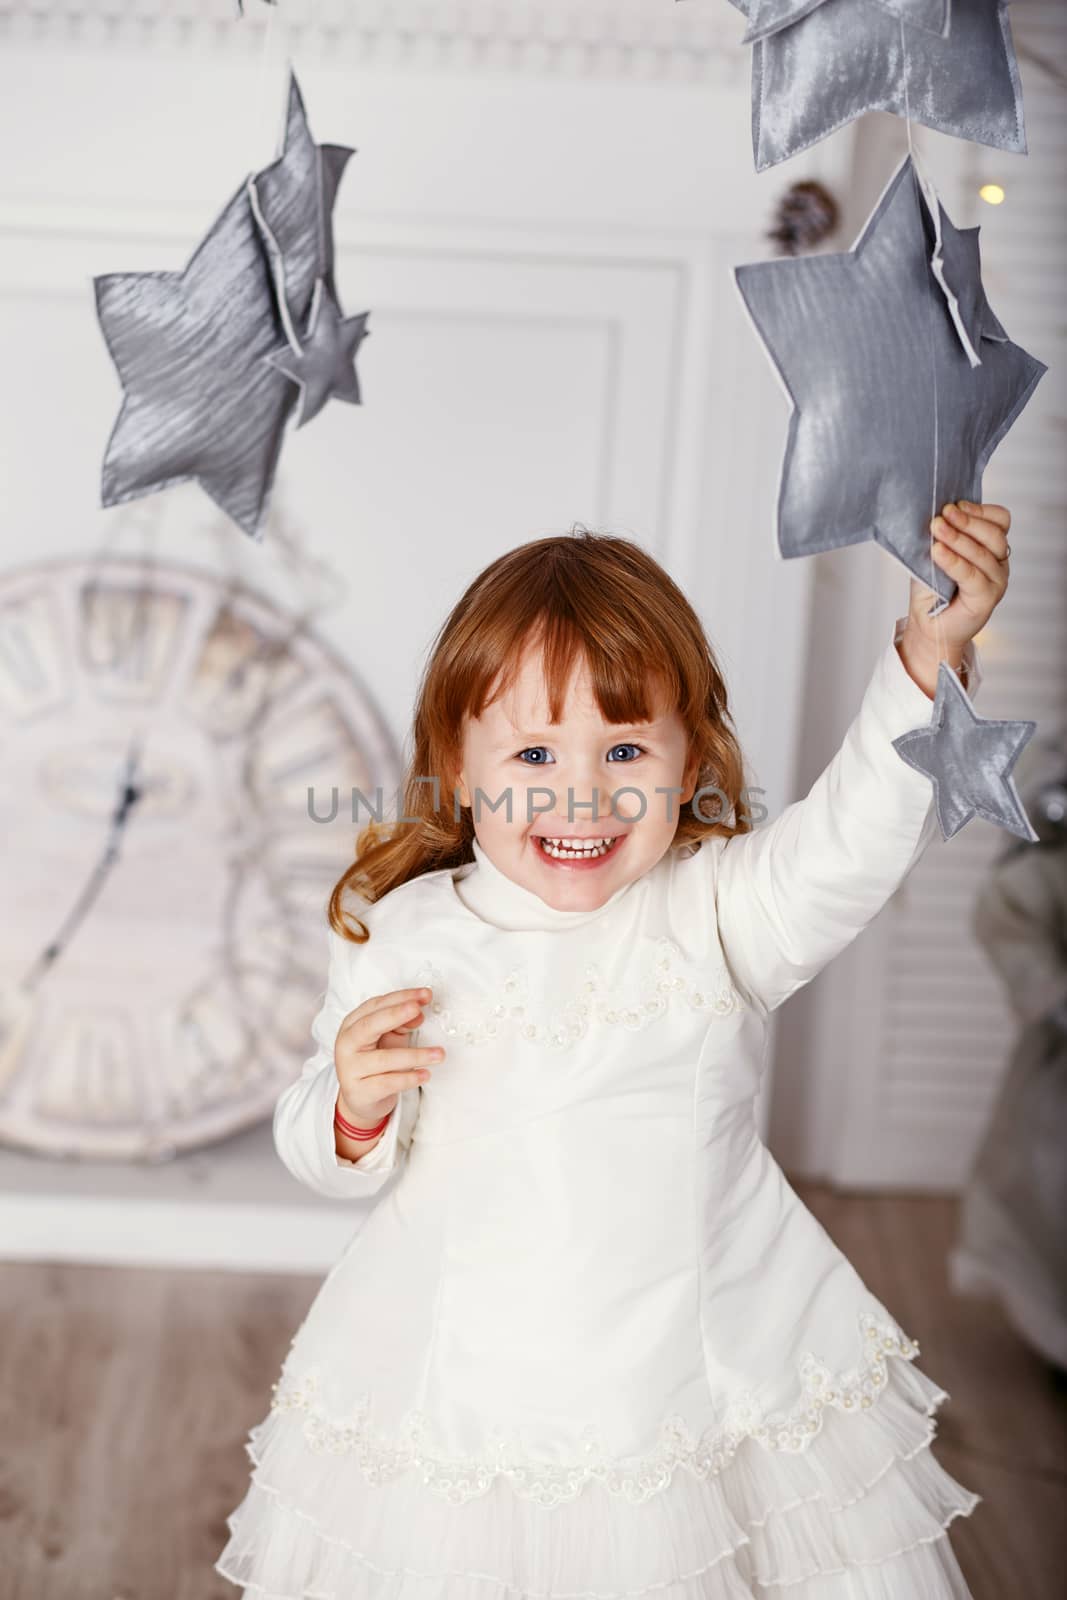 Portrait of a beautiful little girl in a white dress in the interior with Christmas decorations. Baby girl grabs and catches toy star - an element of a Christmas decor